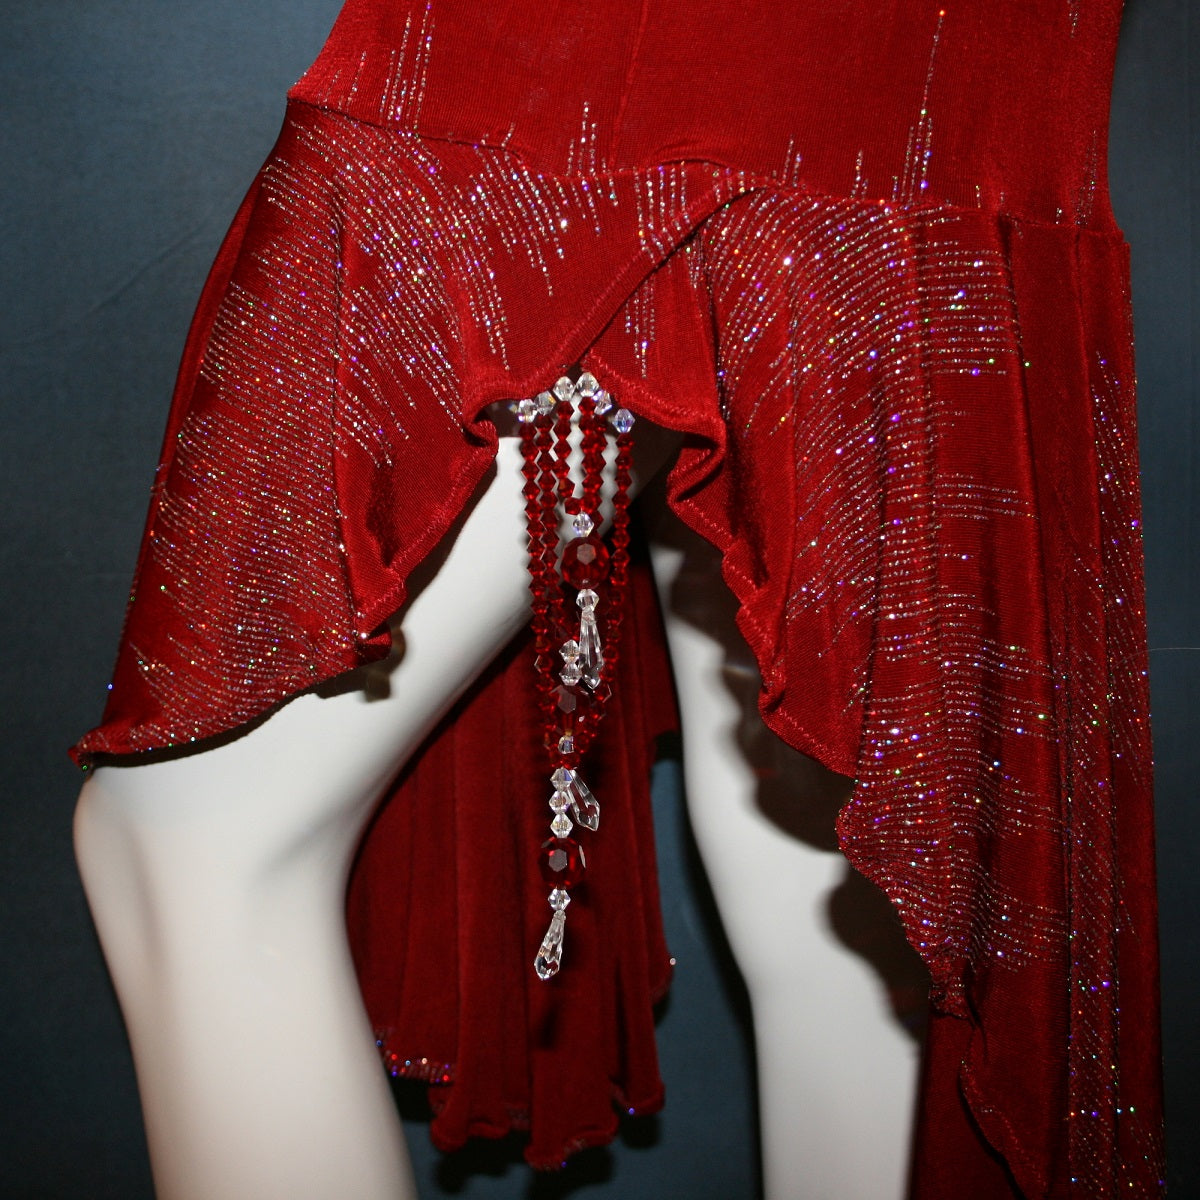 close up details of Deep scarlette red Latin/rhythm/tango dress created in glitter slinky with an awesome electrifying glitter pattern features lattice detailing in the back, long sleeves with Swarovski hand beading in the skirt sides.